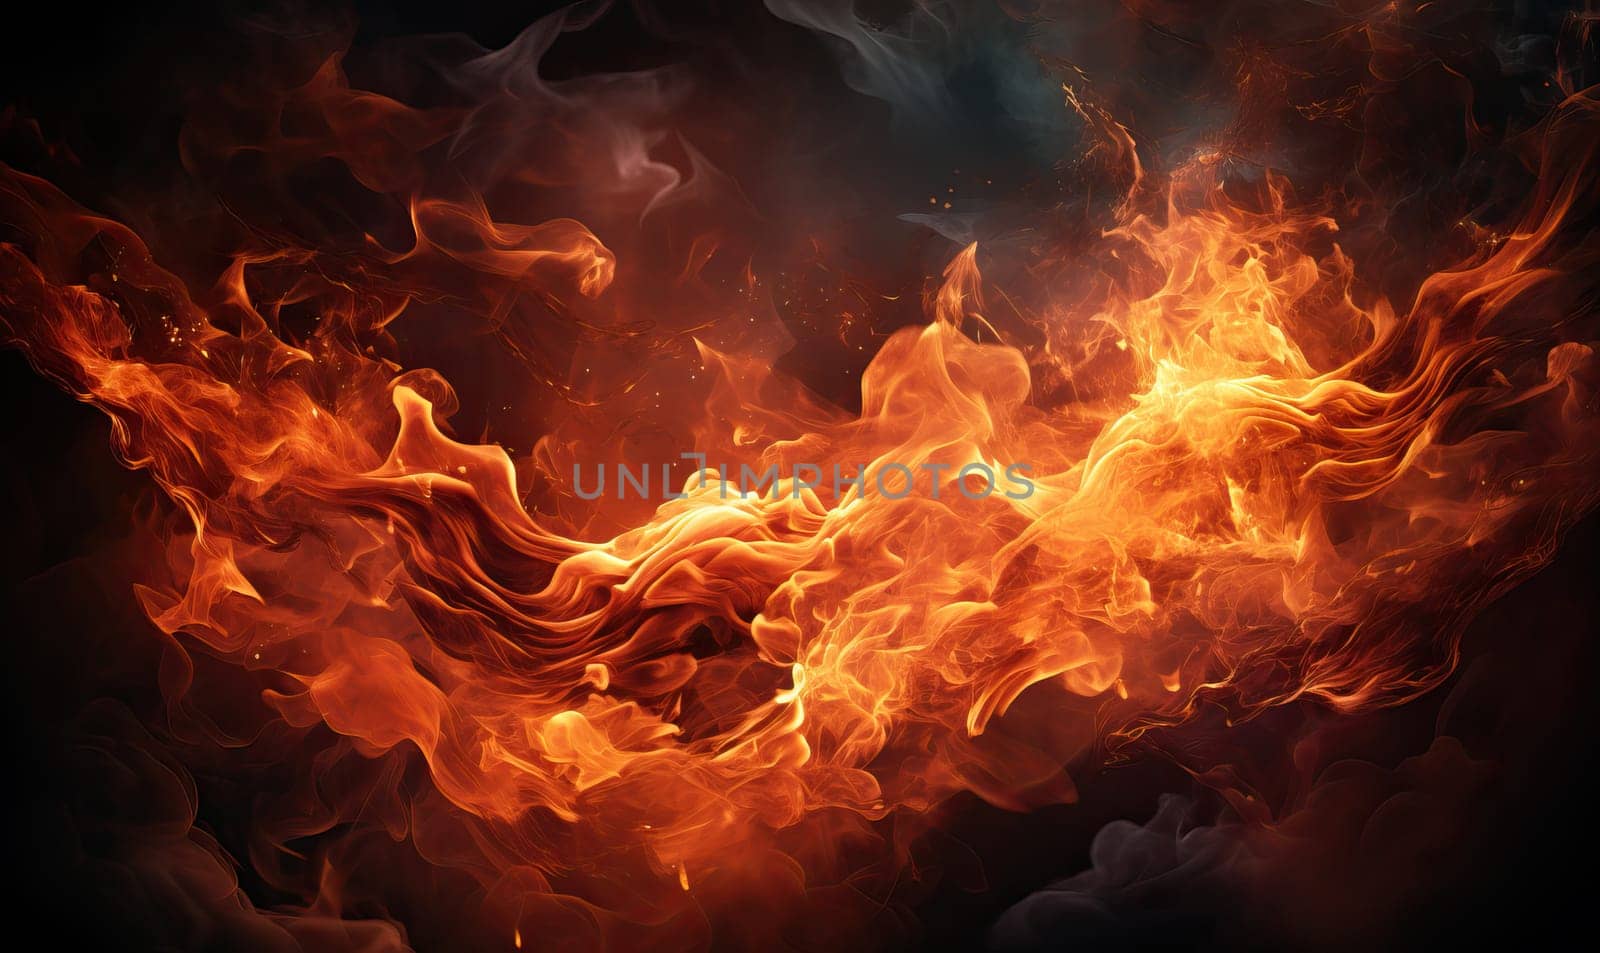 Abstract background with fire effect full frame. by Fischeron